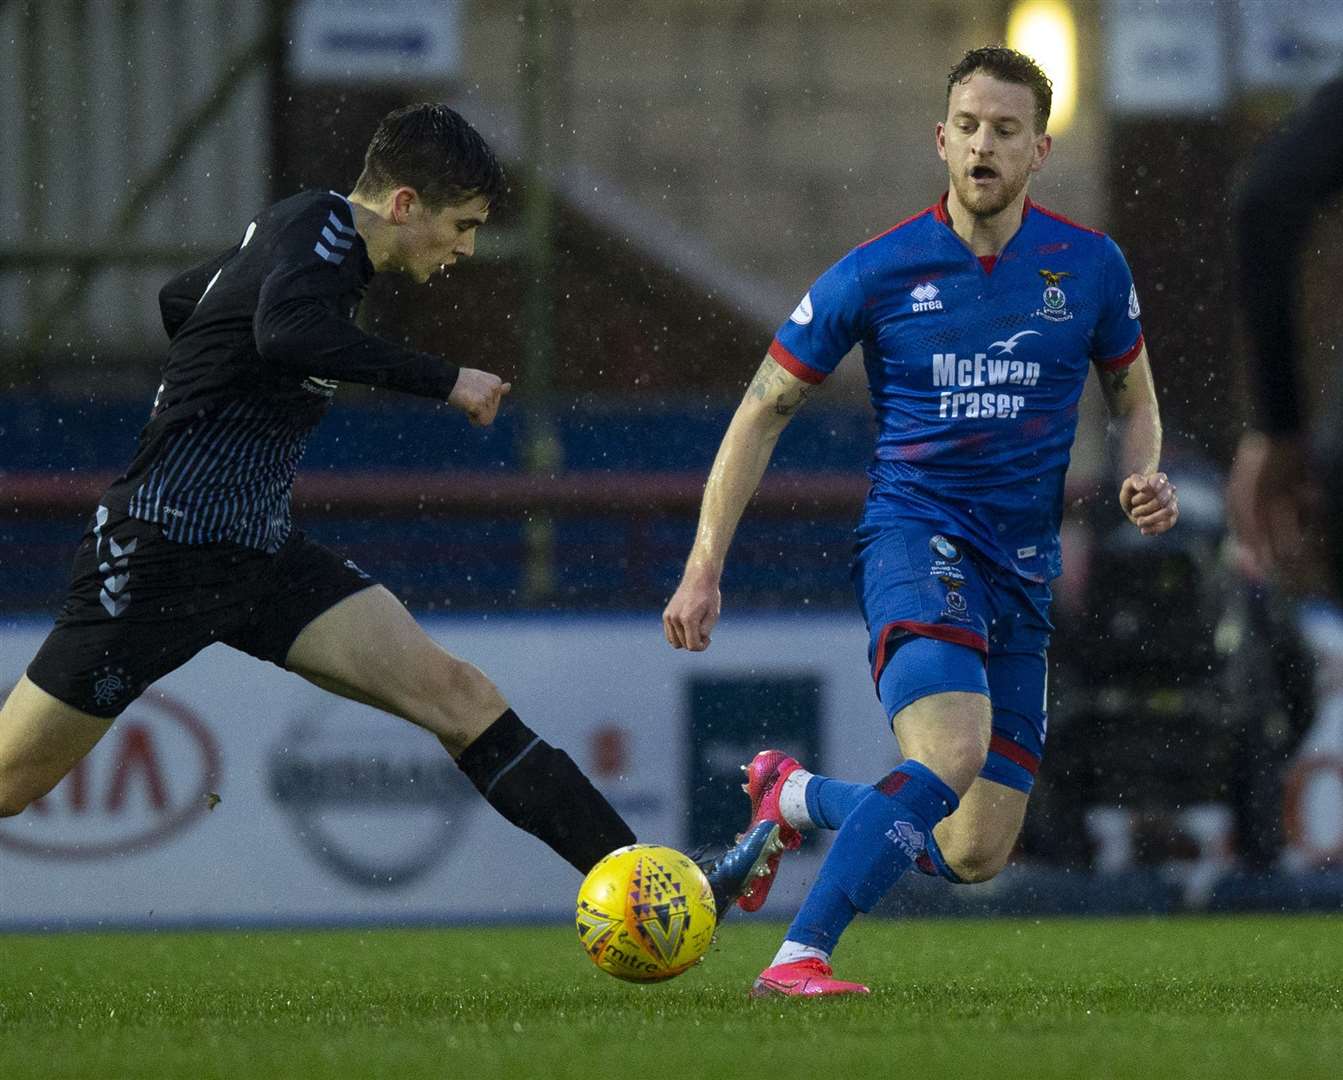 Tom Walsh is leaving Inverness Caledonian Thistle.